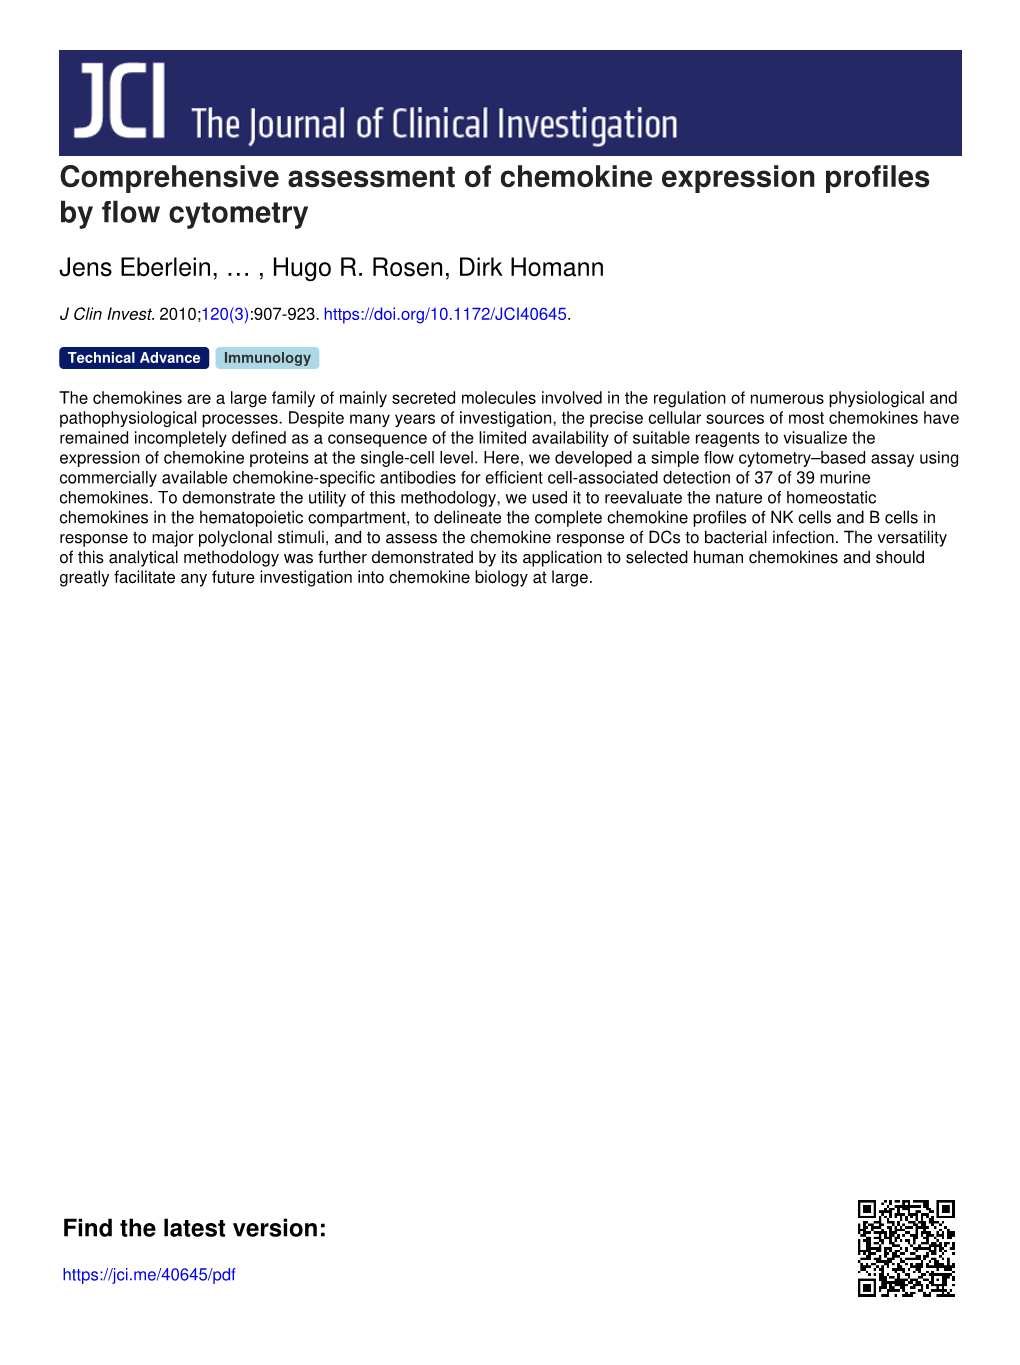 Comprehensive Assessment of Chemokine Expression Profiles by Flow Cytometry